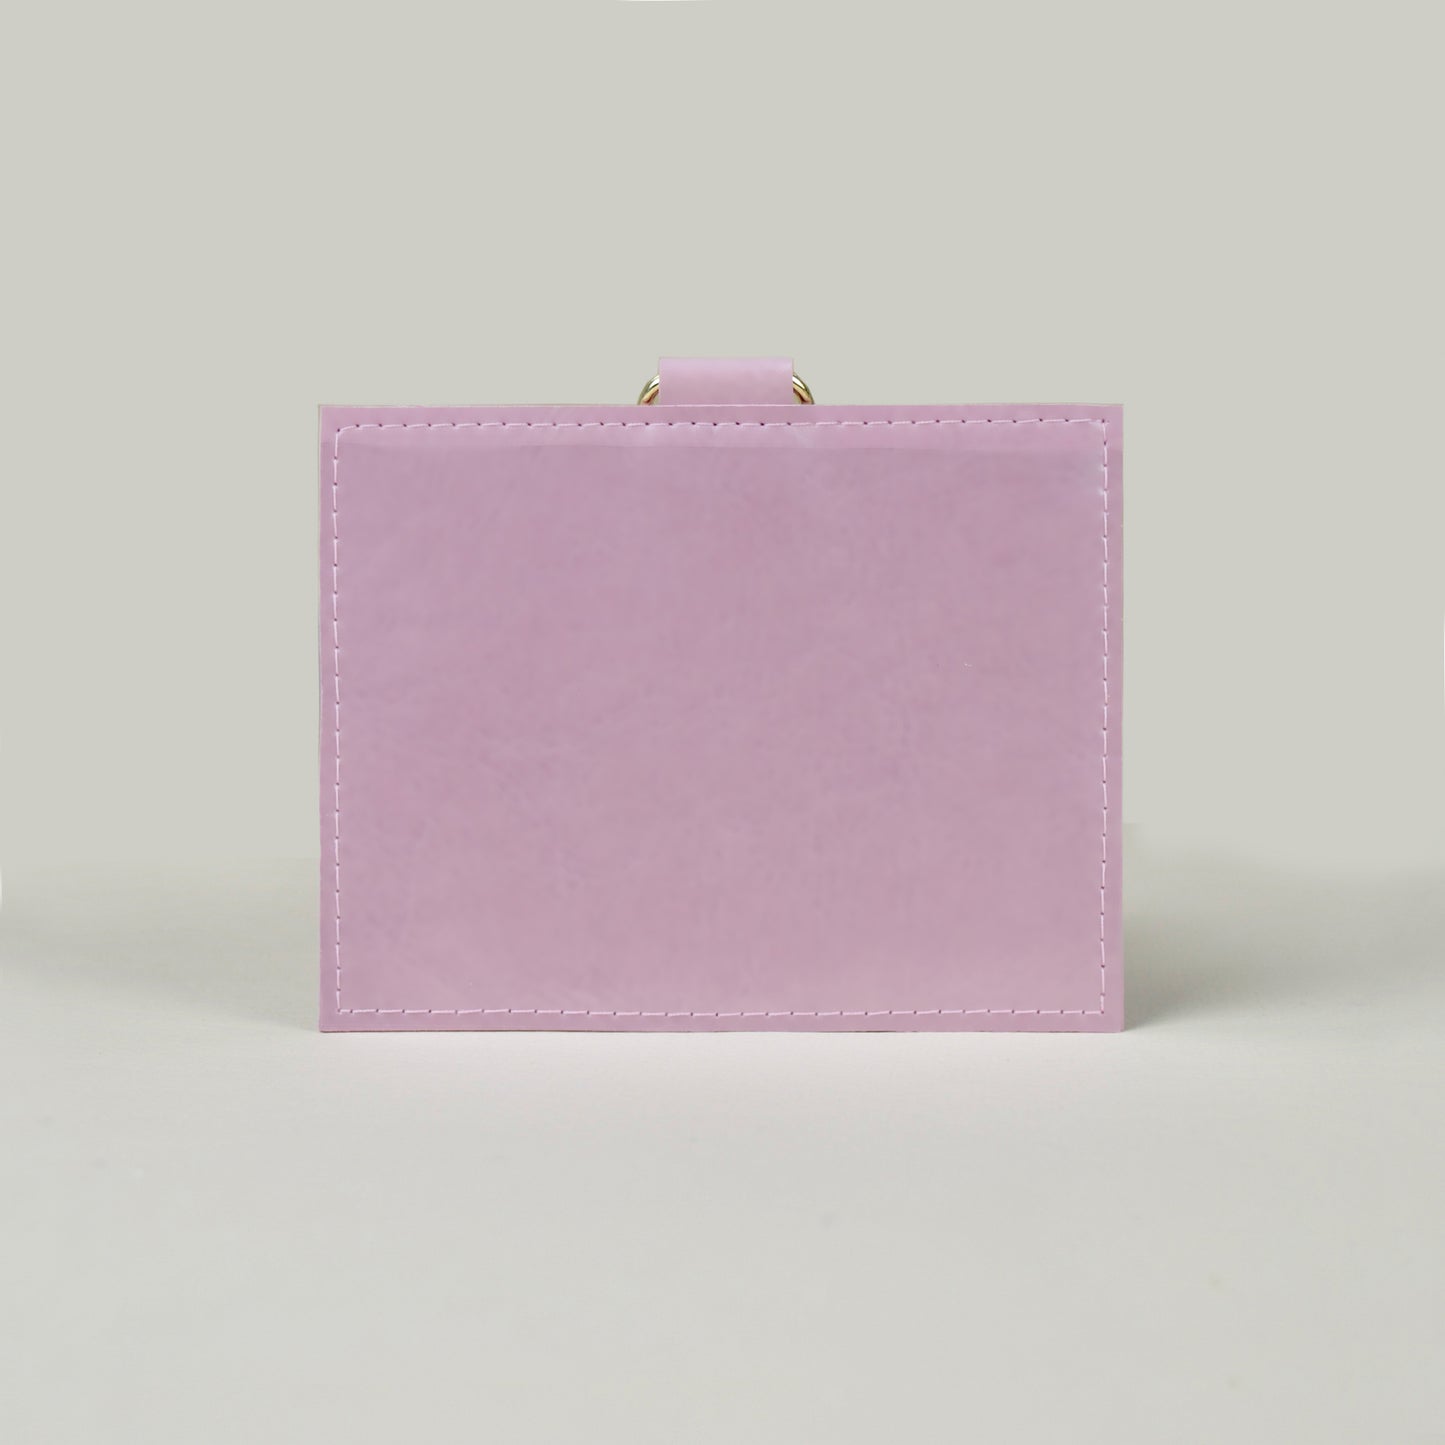 Vaccination Card Holder